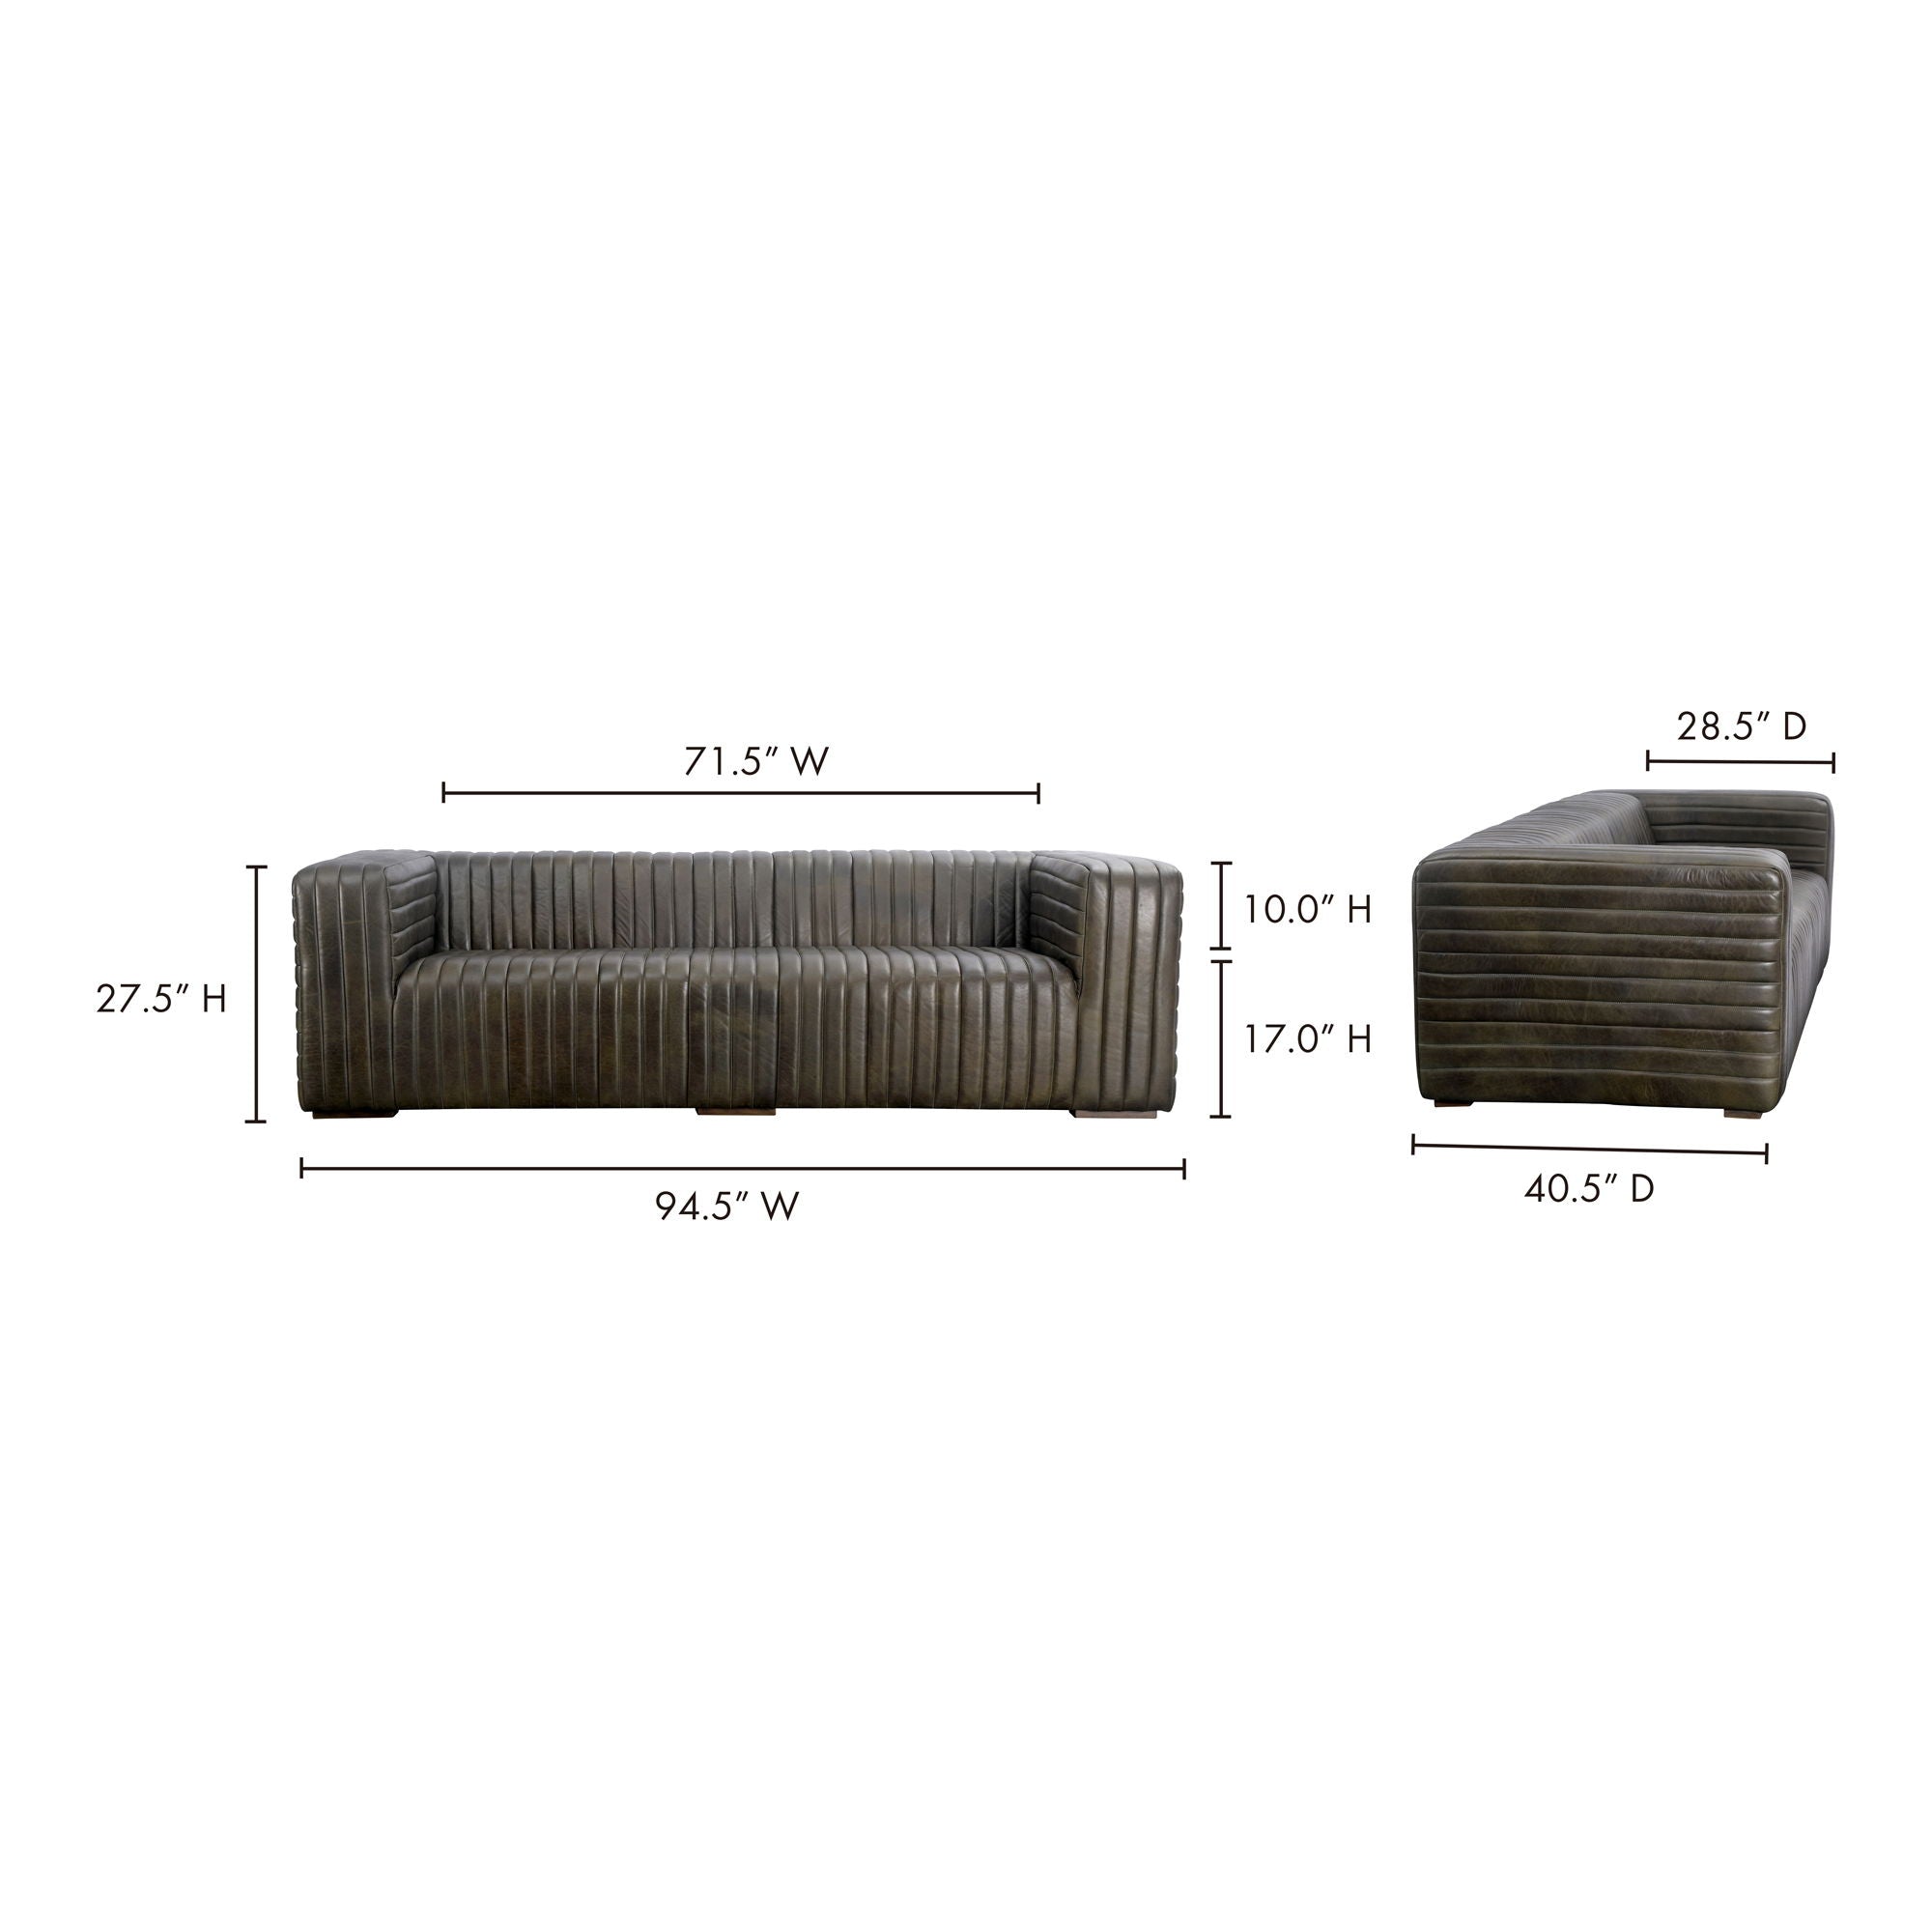 Castle Sofa - Olive Green Top-Grain Leather - Channel-Stitched Design - Stylish Living Room Furniture